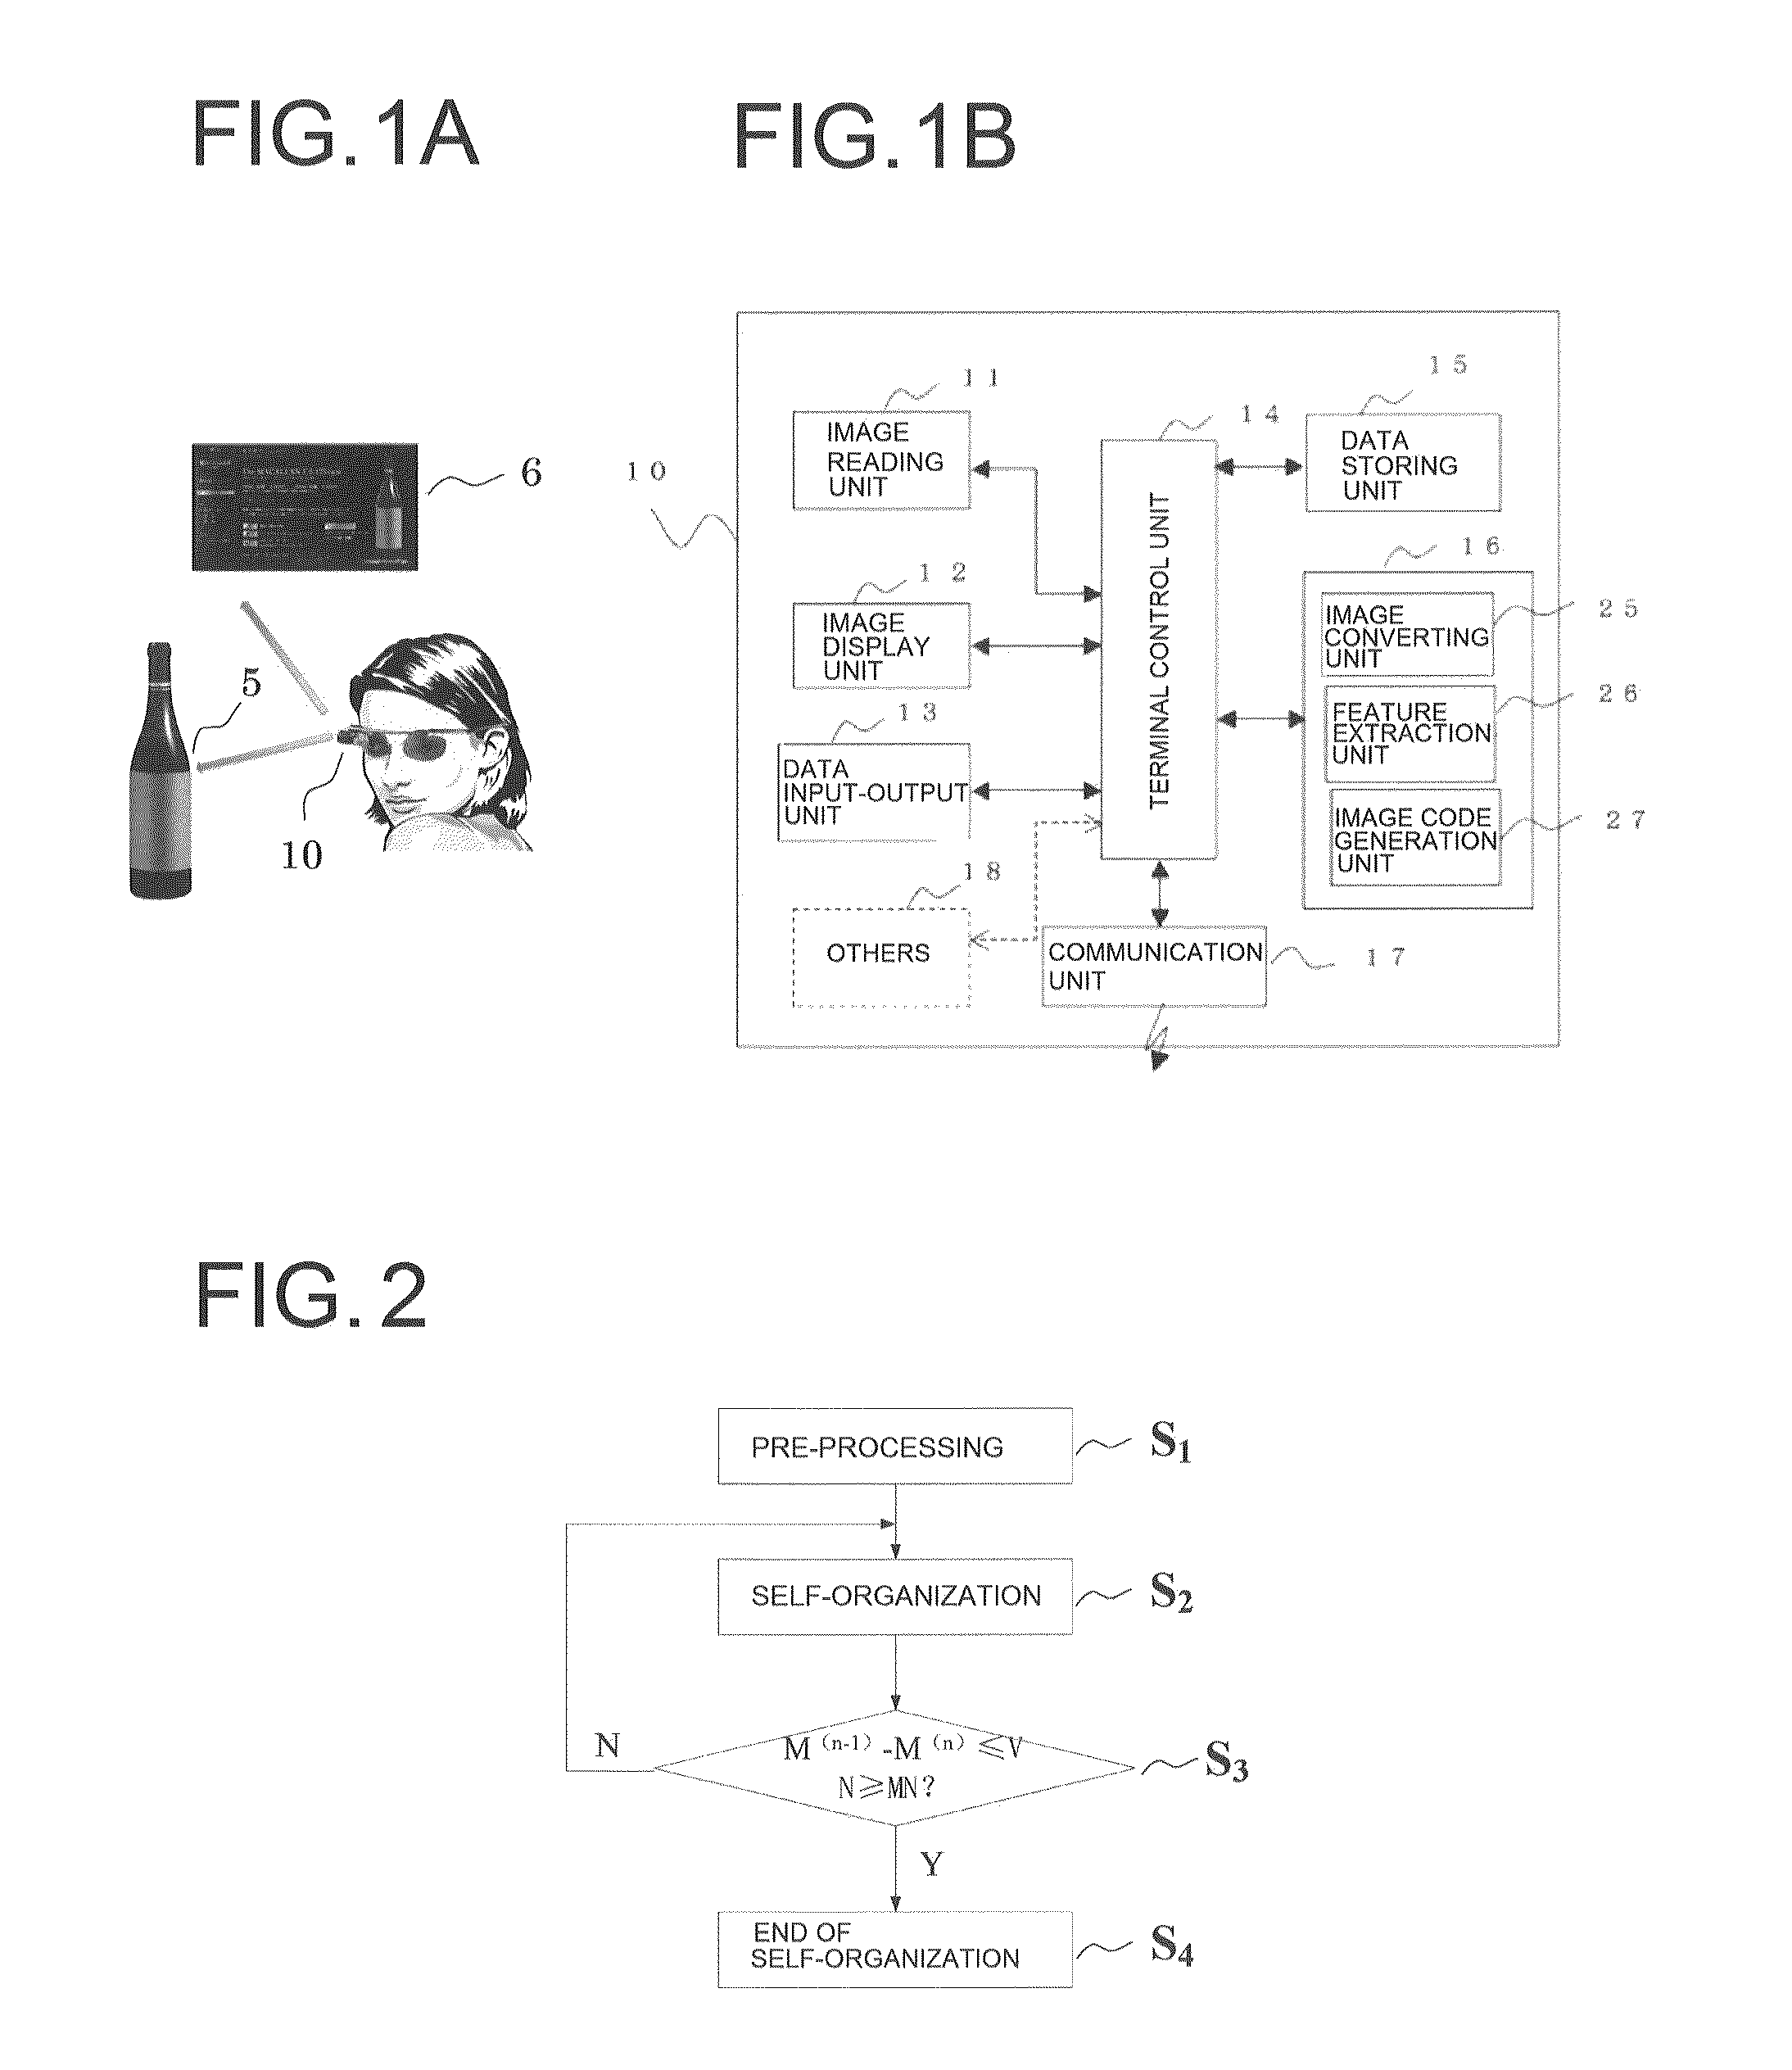 Code conversion device for image information, a code conversion method for the image information, a system for providing image related information using an image code, a code conversion program for the image information, and a recording medium in which the program is recorded